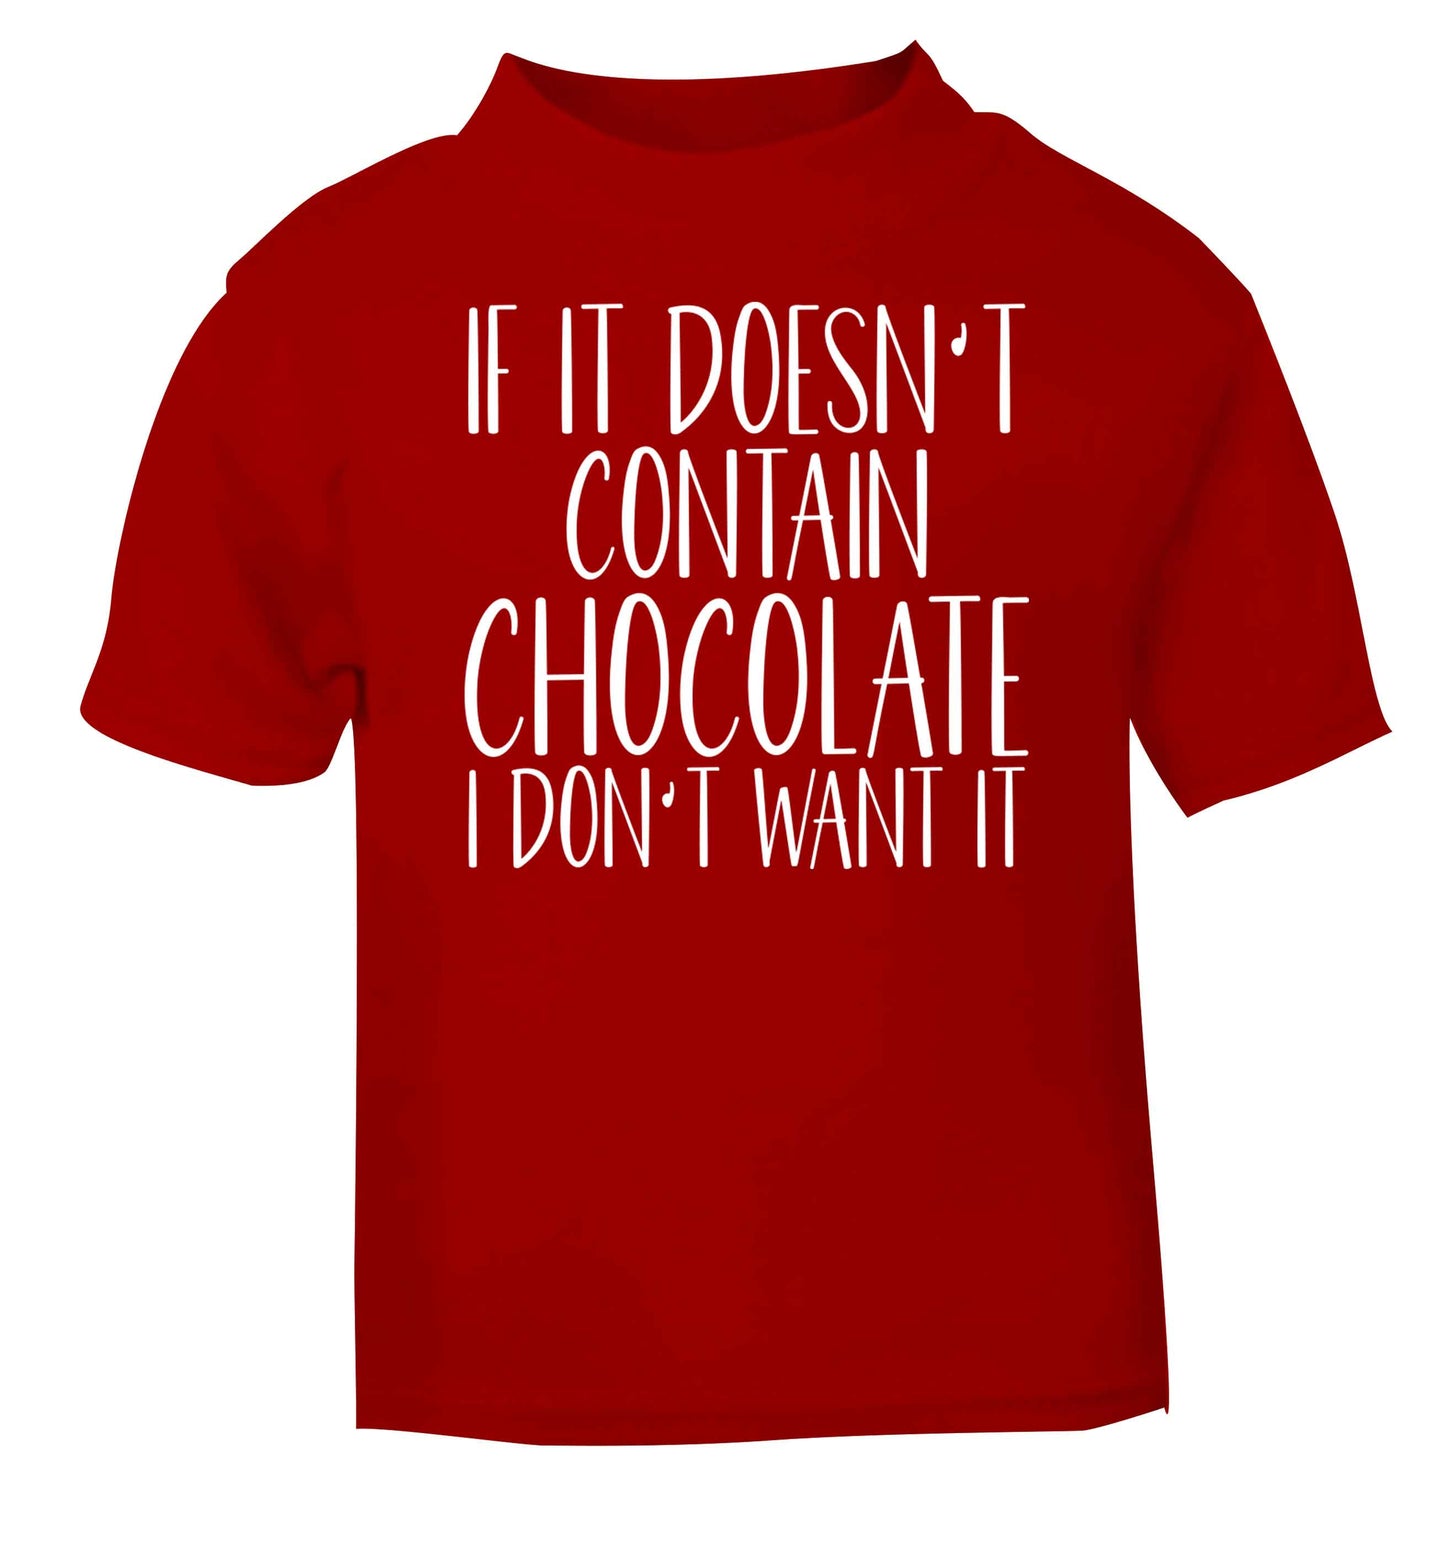 If it doesn't contain chocolate I don't want it red baby toddler Tshirt 2 Years